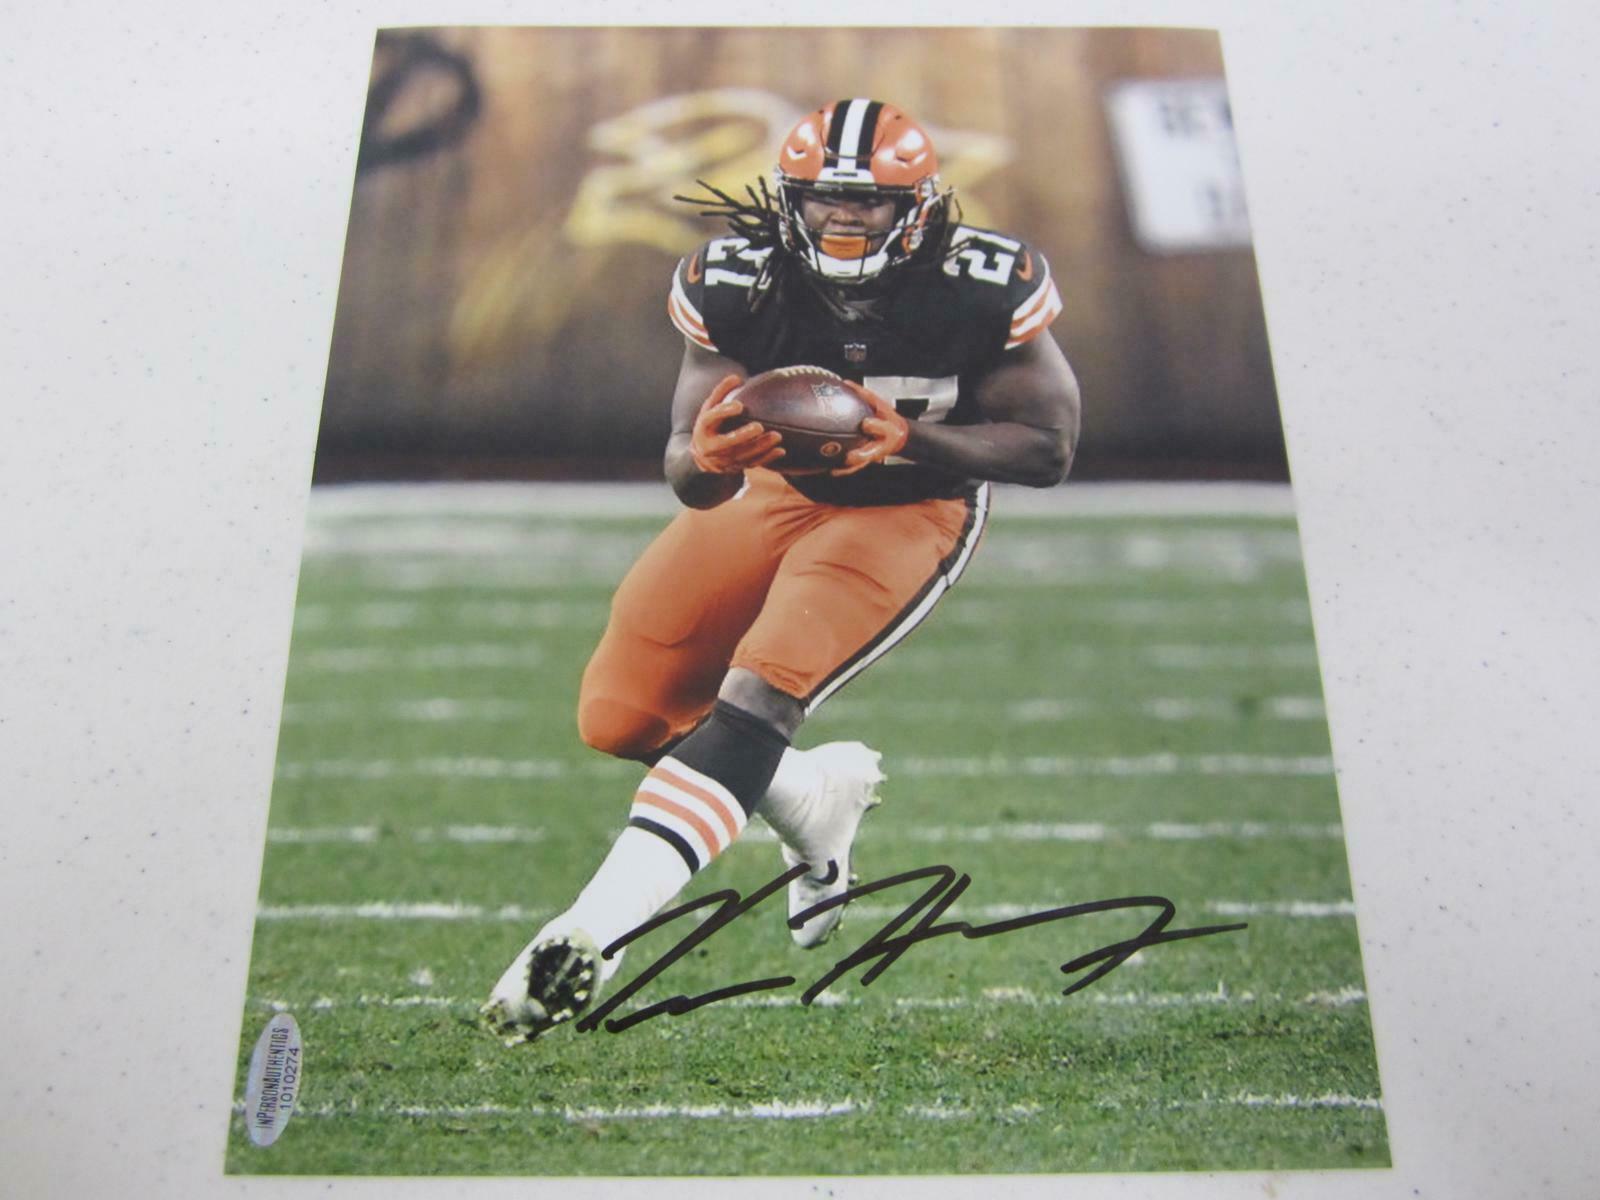 Kareem Hunt Signed Autographed 8x10 Photo With Coa Cleveland Browns